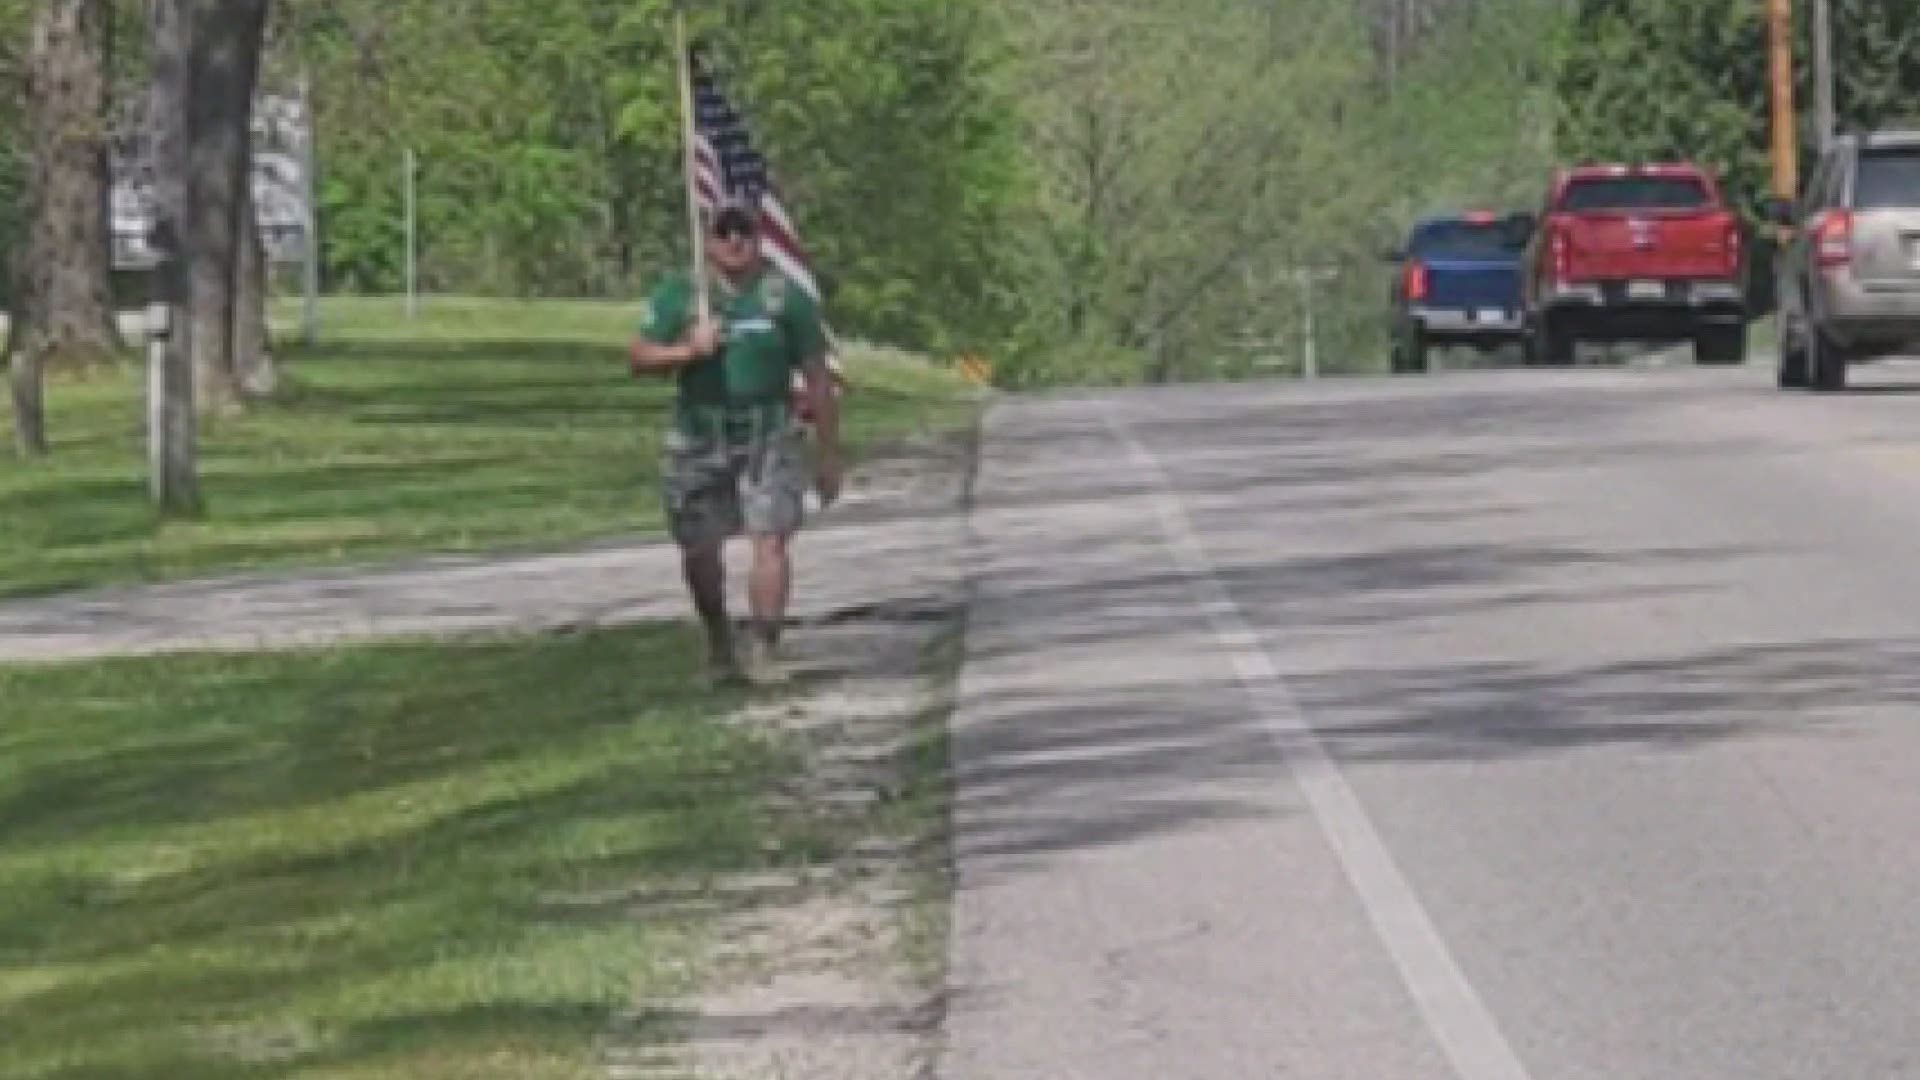 His sister-in-law said every Memorial Day he hikes with the flag from downtown Newaygo to  Newaygo Cemetery and places pennies on the tombstones of veterans.